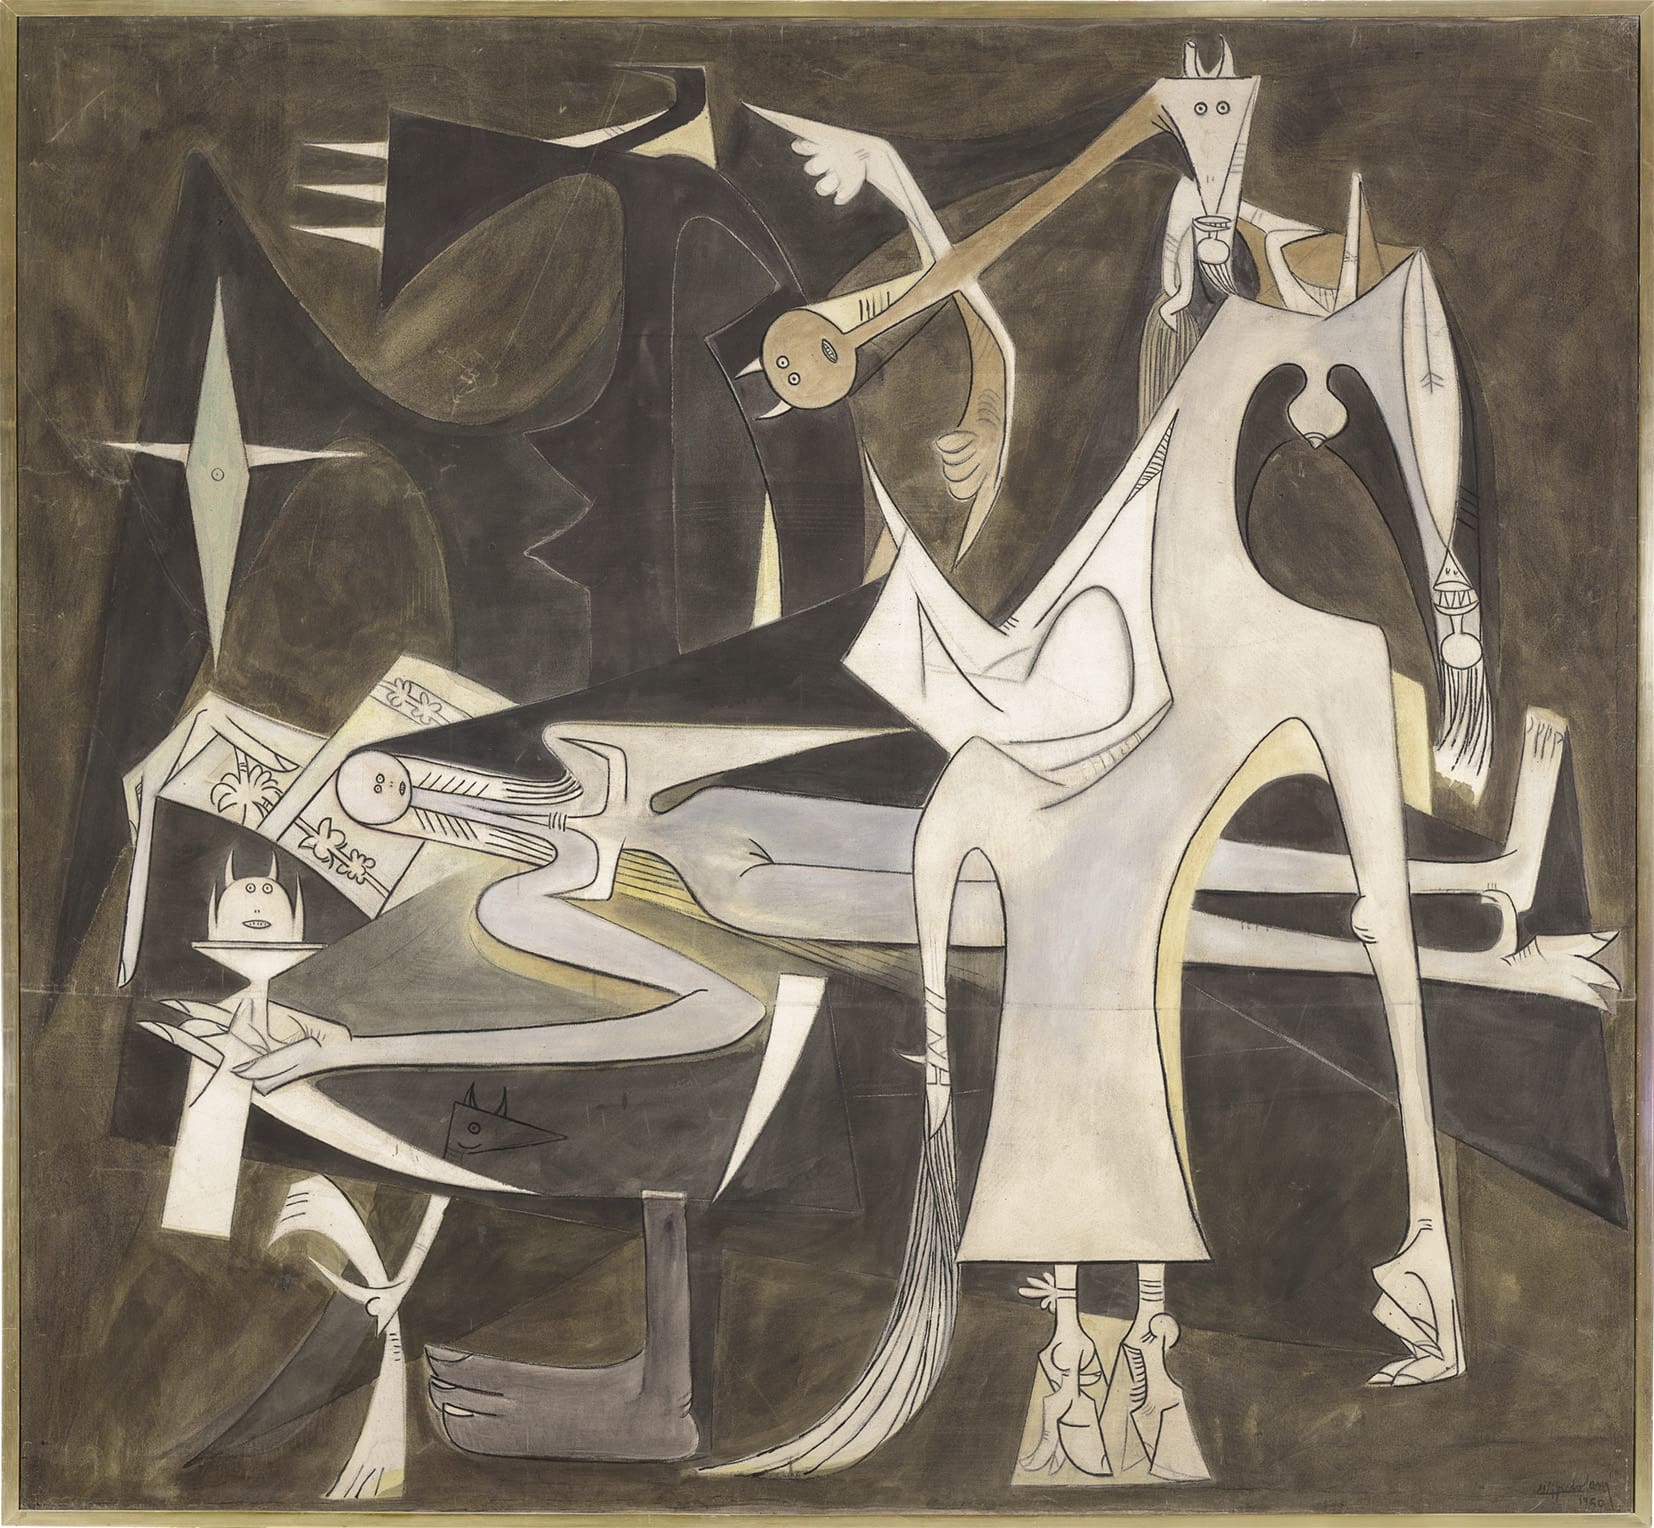 The best art galleries and museums in Mexico City | An angular painting by Wilfredo Lam, on display at the Palacio de Bellas Artes in Mexico City.